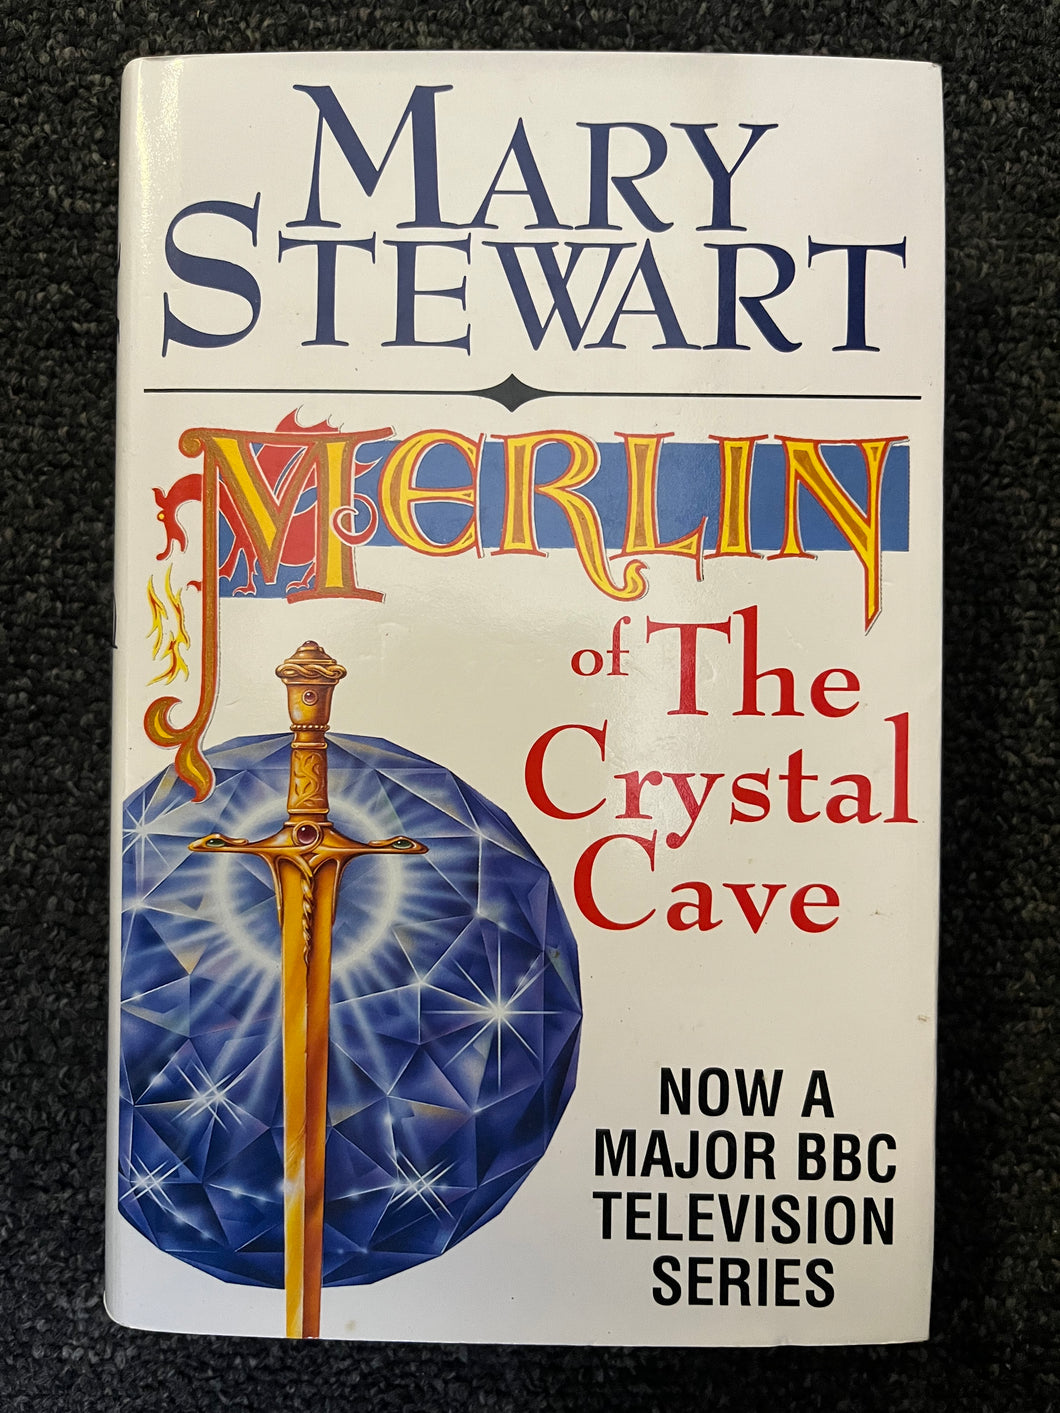 Pre Owned - Mary Stewart - Merlin of The Crystal Cave